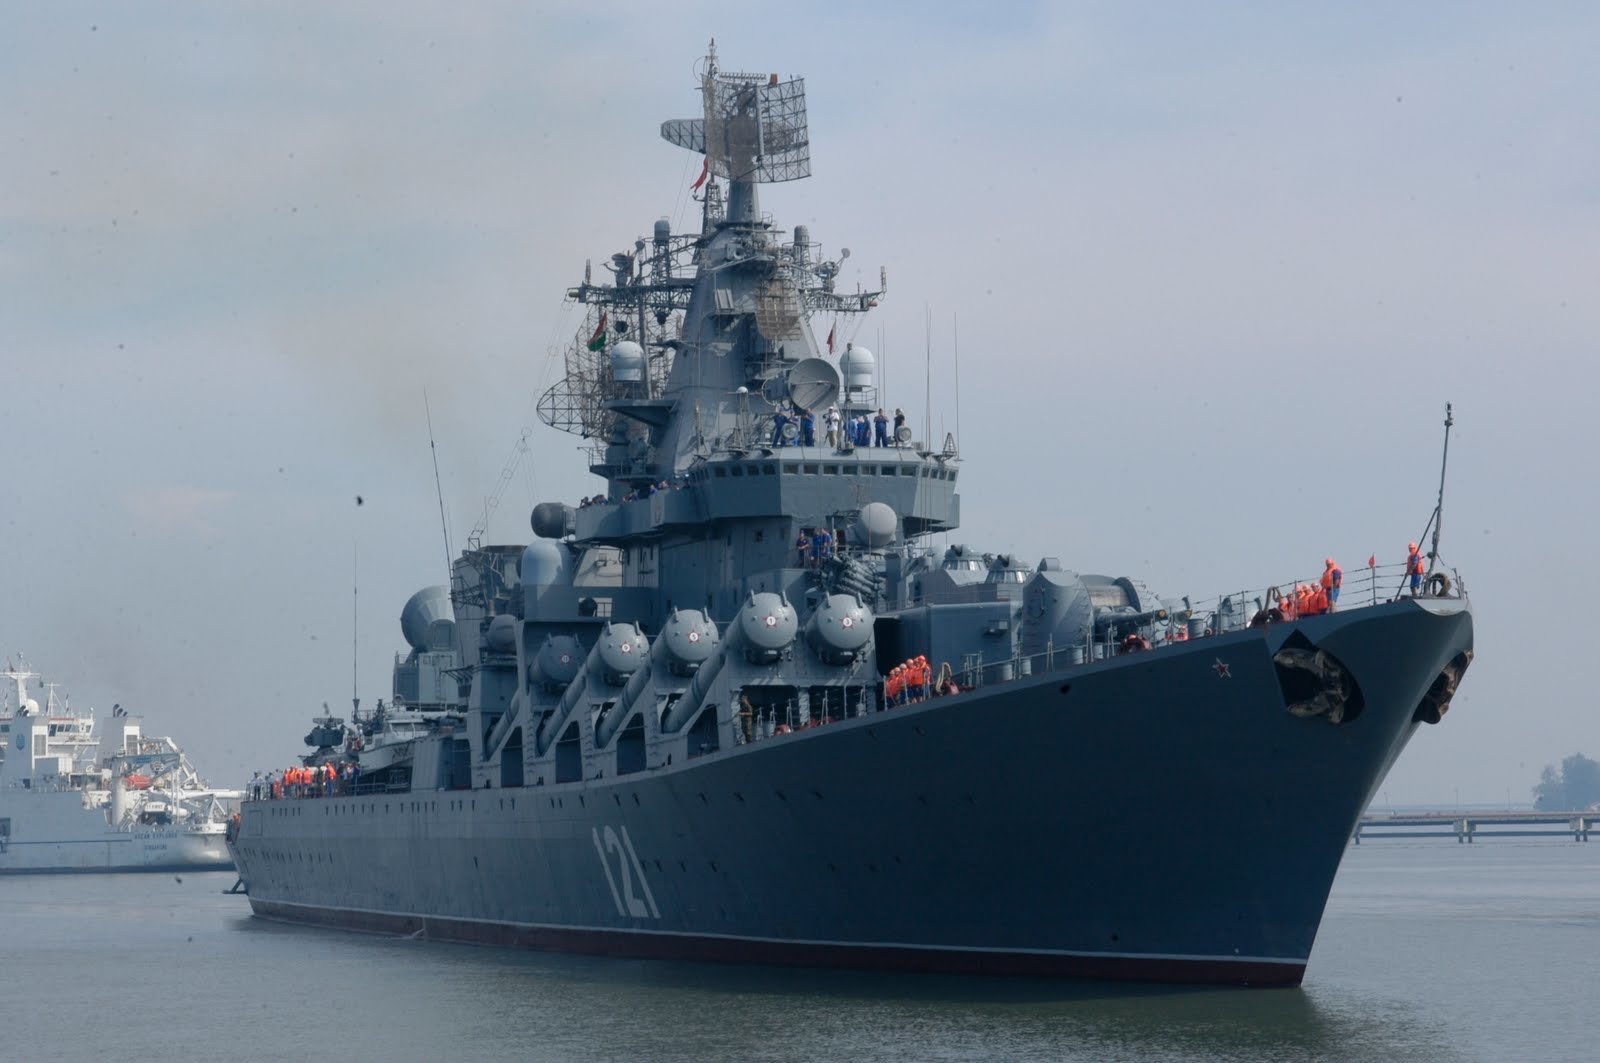 Russia Confirms Black Sea Flagship On Fire, "Seriously Damaged" Off Odessa After Reported Missile Strike